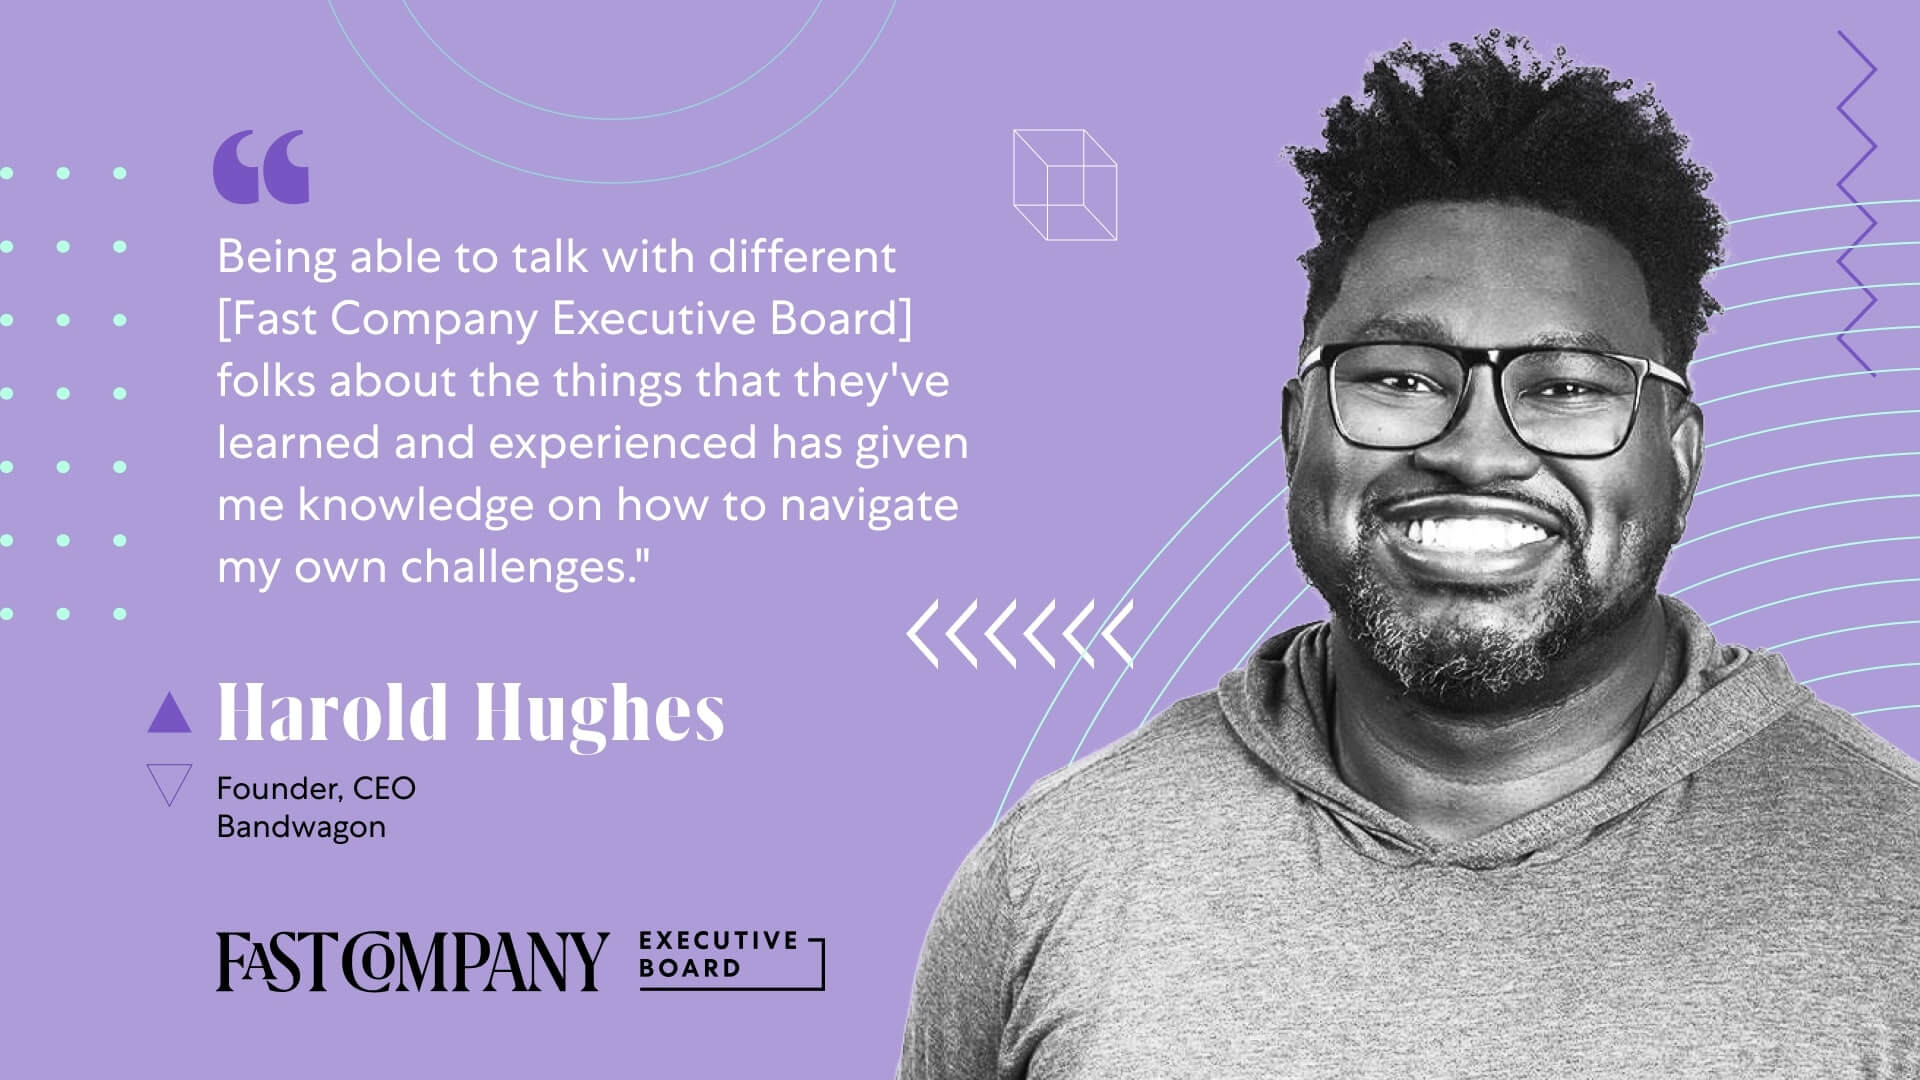 Fast Company Executive Board Connections Help Harold Hughes Navigate Business Challenges